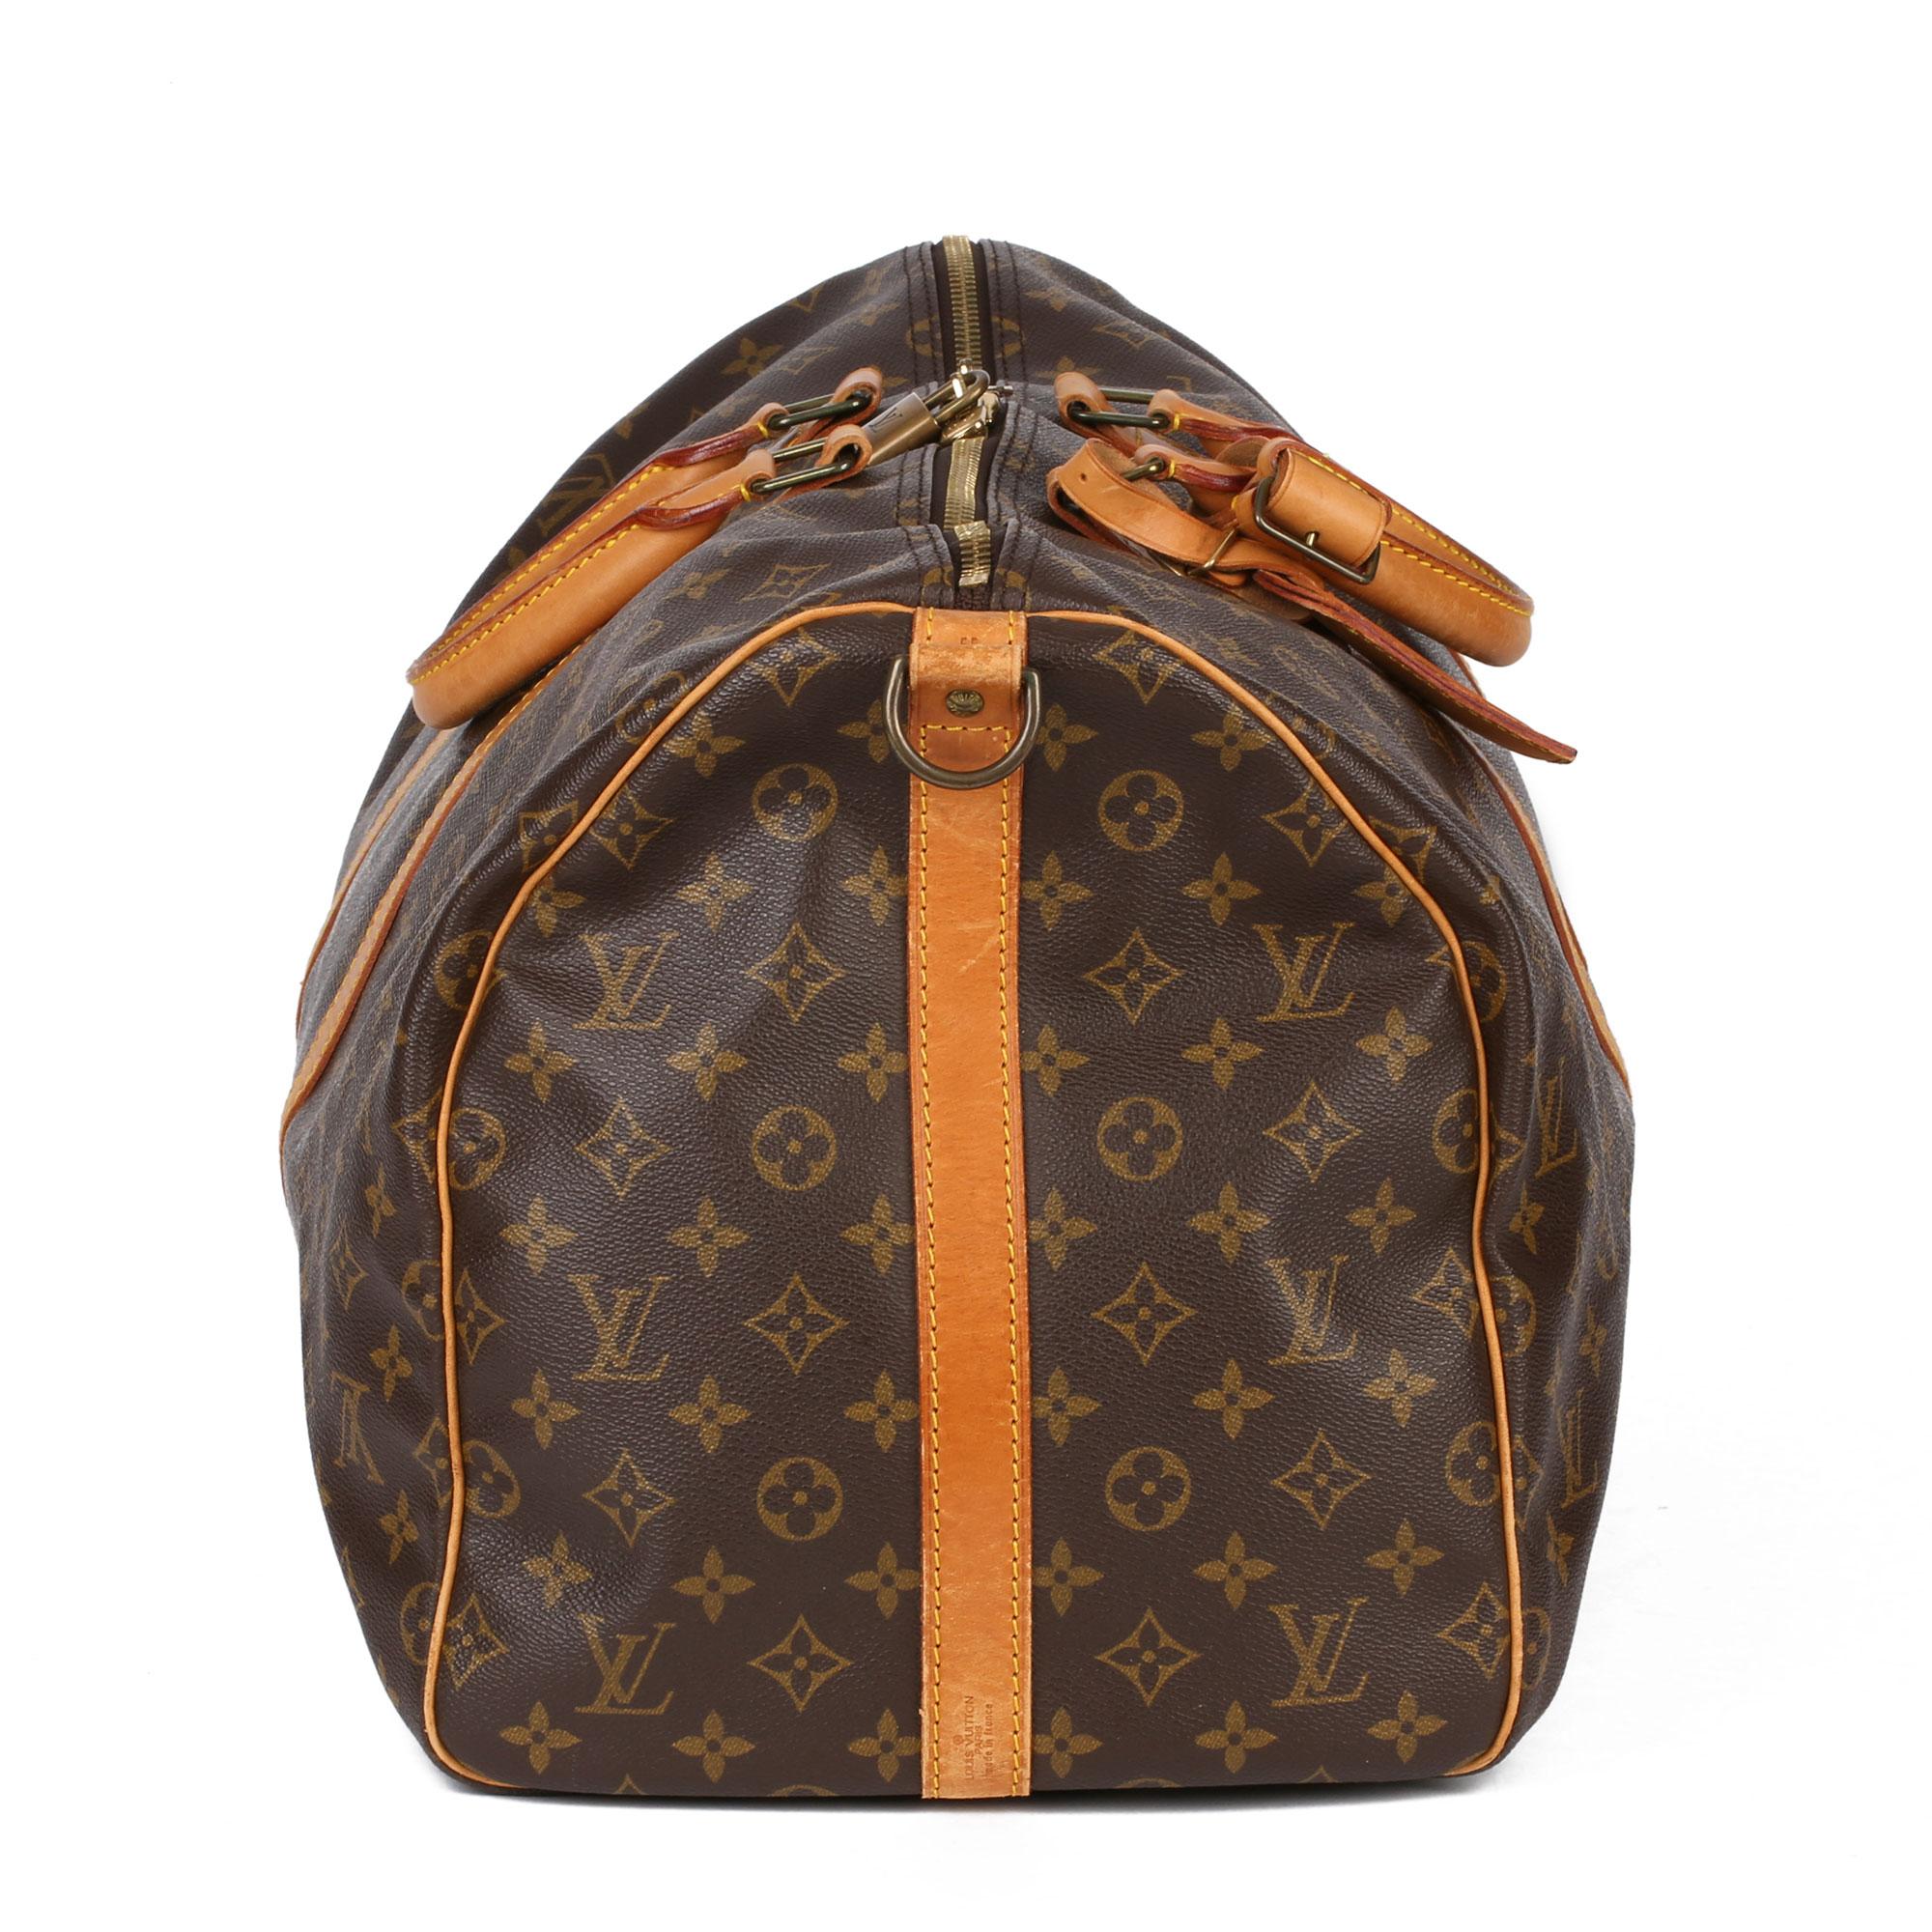 LOUIS VUITTON
Brown Monogram Coated Canvas & Vachetta Leather Vintage Keepall 55 Bandoulière

Xupes Reference: HB3686
Serial Number: VI 0930
Age (Circa): 1990
Accompanied By: Shoulder Strap, Luggage Tag, Handle Keeper, Padlock, Keys
Authenticity